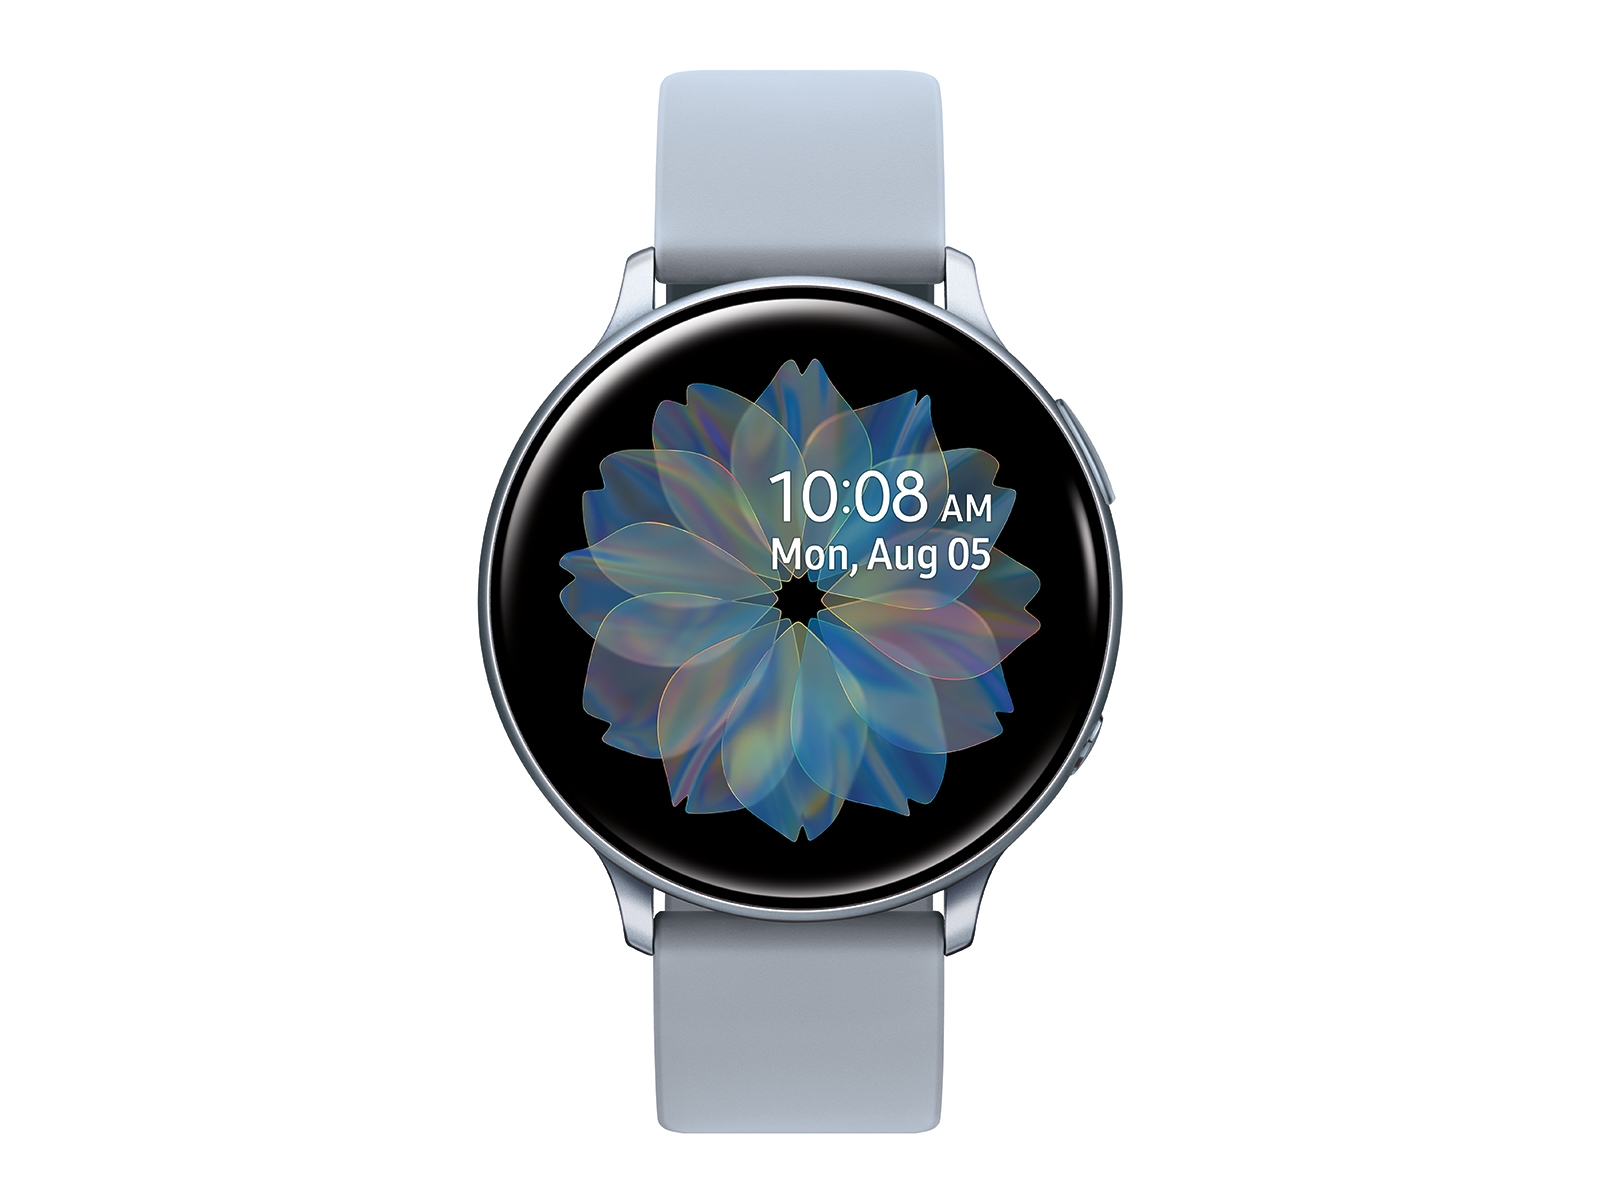 Galaxy watch active 2 price